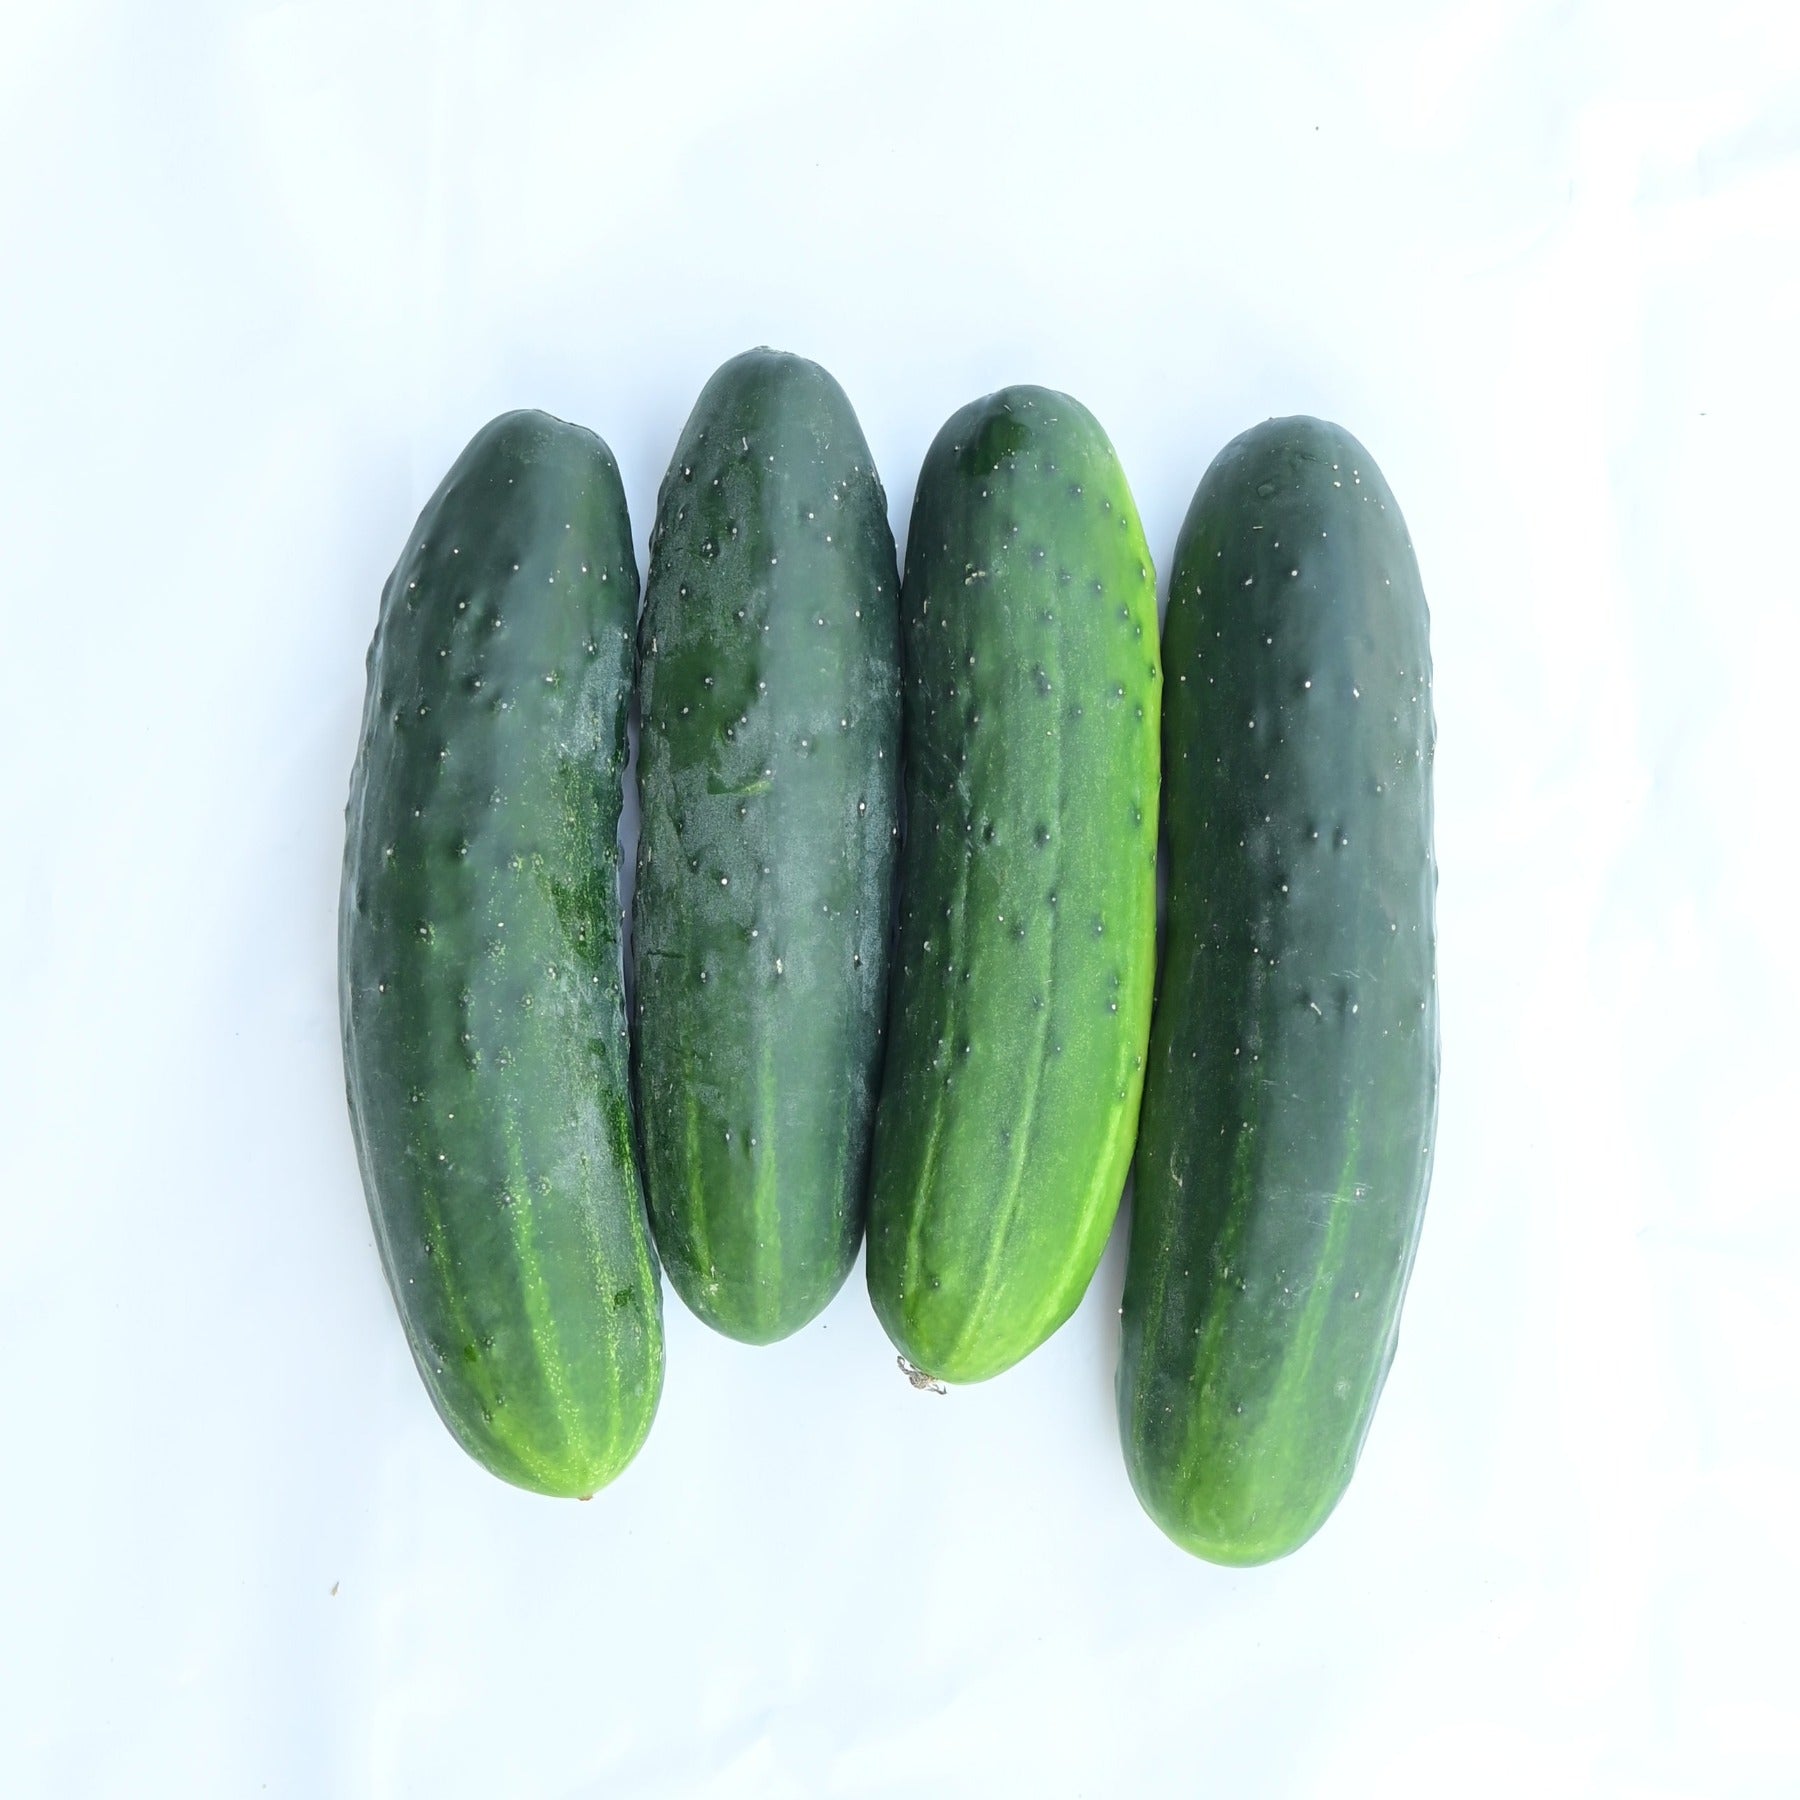 A group of four Poinsett 76 cucumbers against a white background